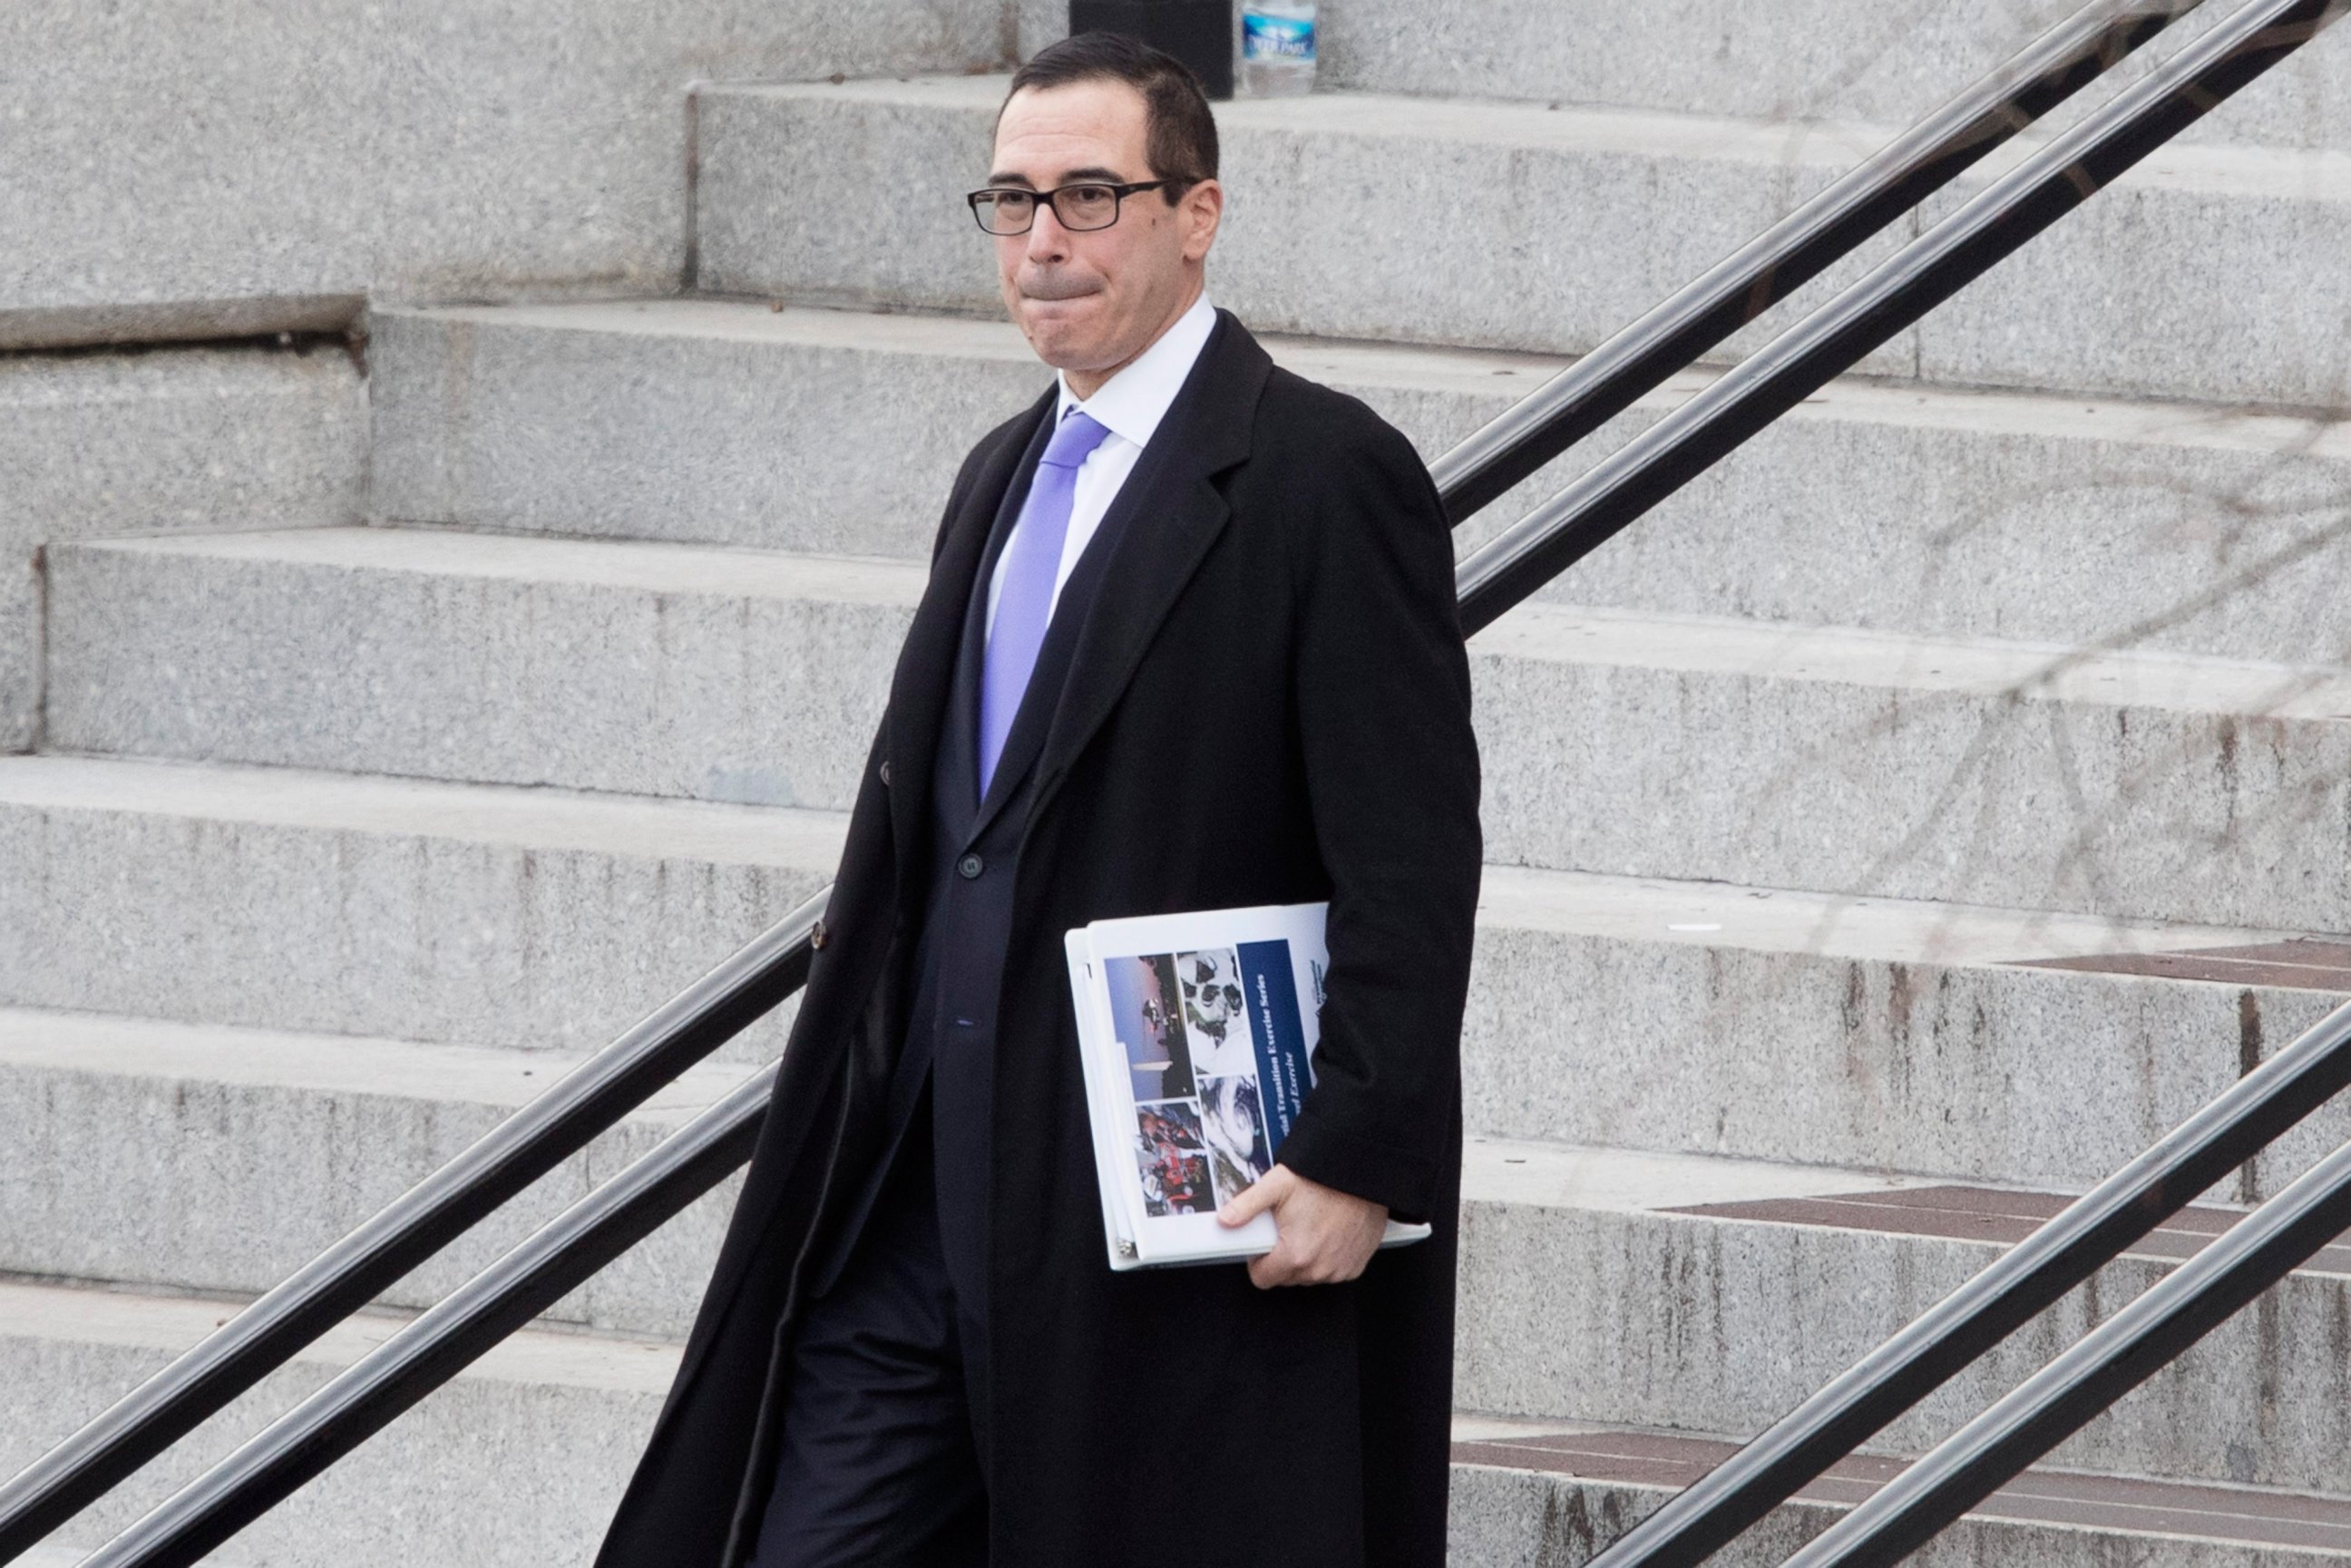 PHOTO: Steve Mnuchin, nominee for Treasury Secretary, walks outside the Eisenhower Executive Office Building after meetings at the White House complex in Washington, Jan. 13, 2017.